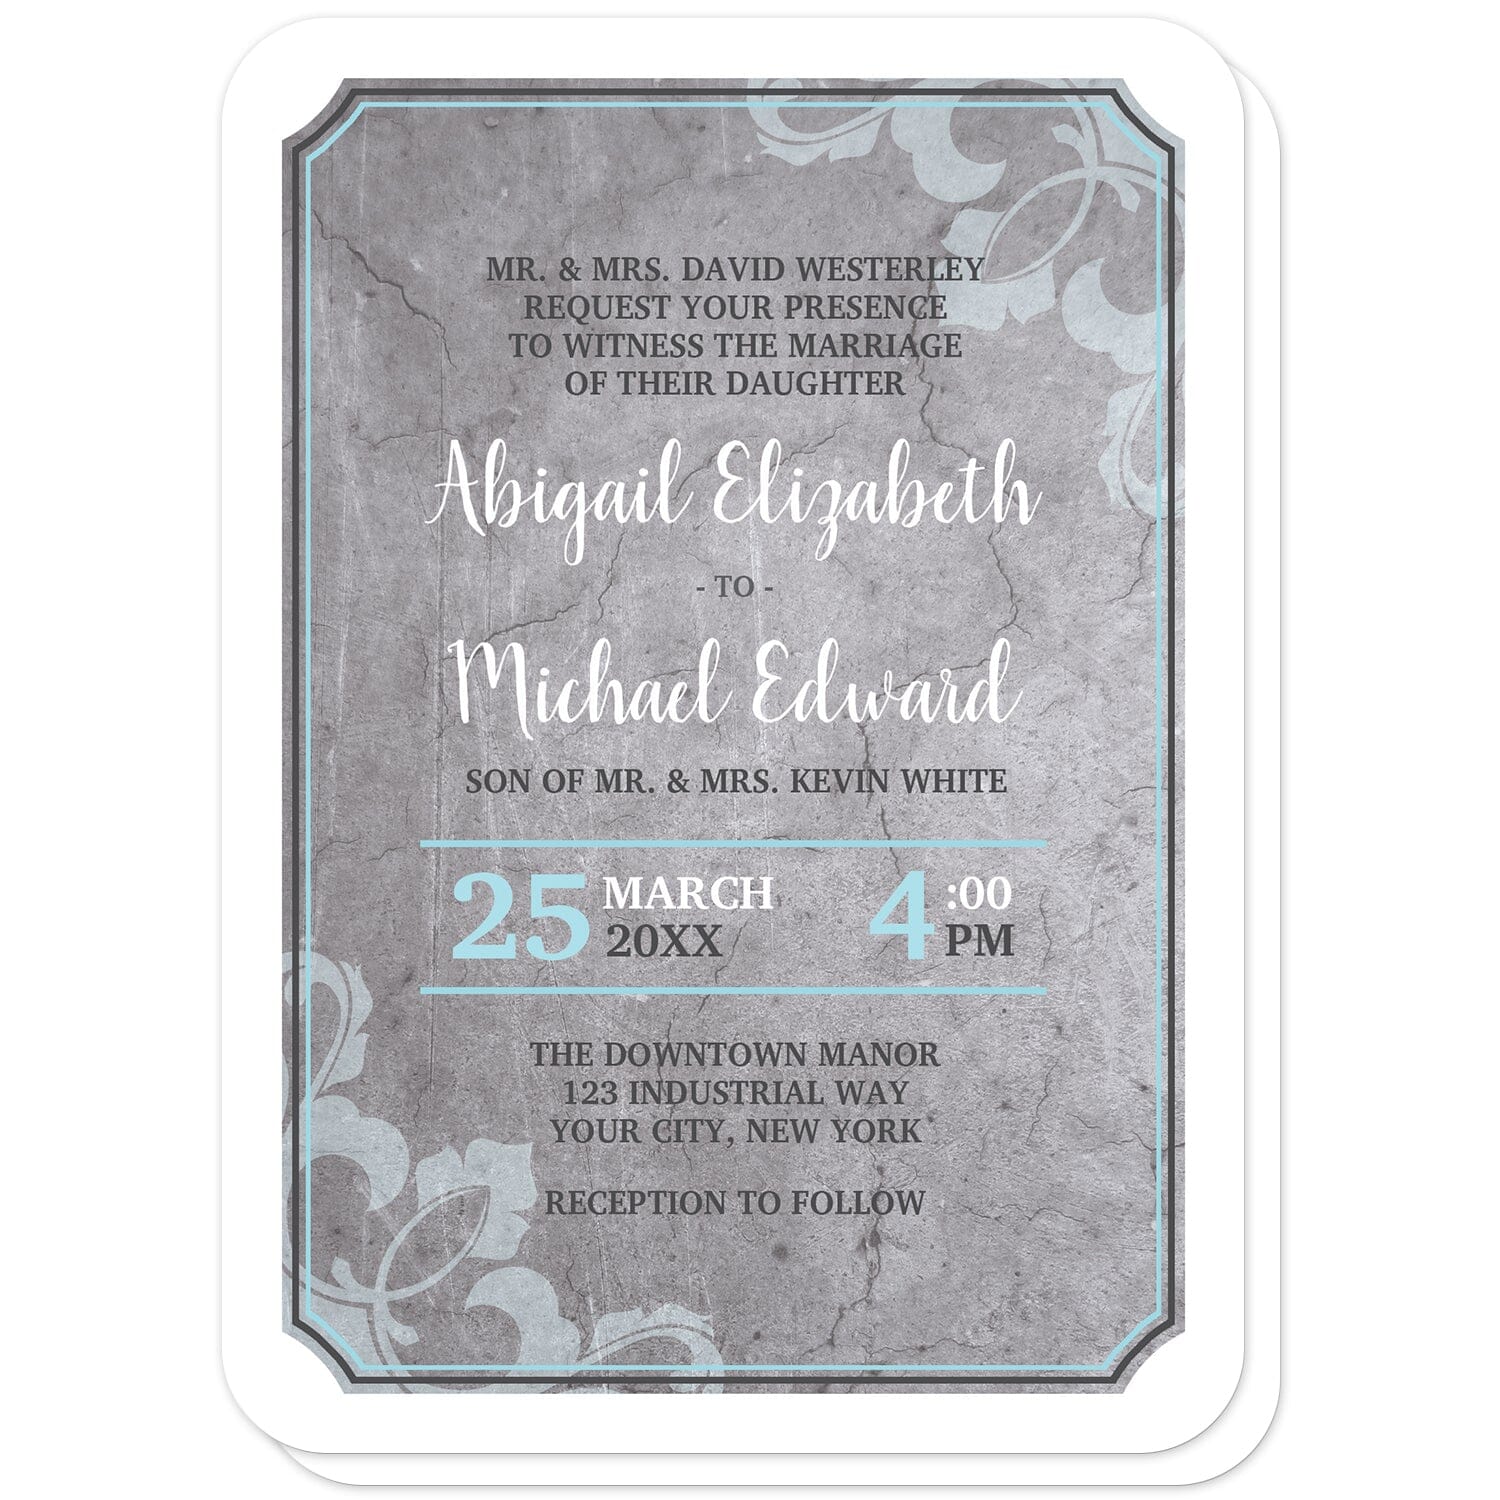 Industrial Aqua Gray Flourish Wedding Invitations (with rounded corners) at Artistically Invited. Invites with a gray concrete design with aqua blue, white, and dark gray typography over the concrete. They're framed with a thick white outer edge design. A light aqua flourish watermark overlays two opposing corners. The names are printed in a white script font over the concrete design while the remaining details are printed in a white, aqua blue, and dark gray all-capital letters serif font. 